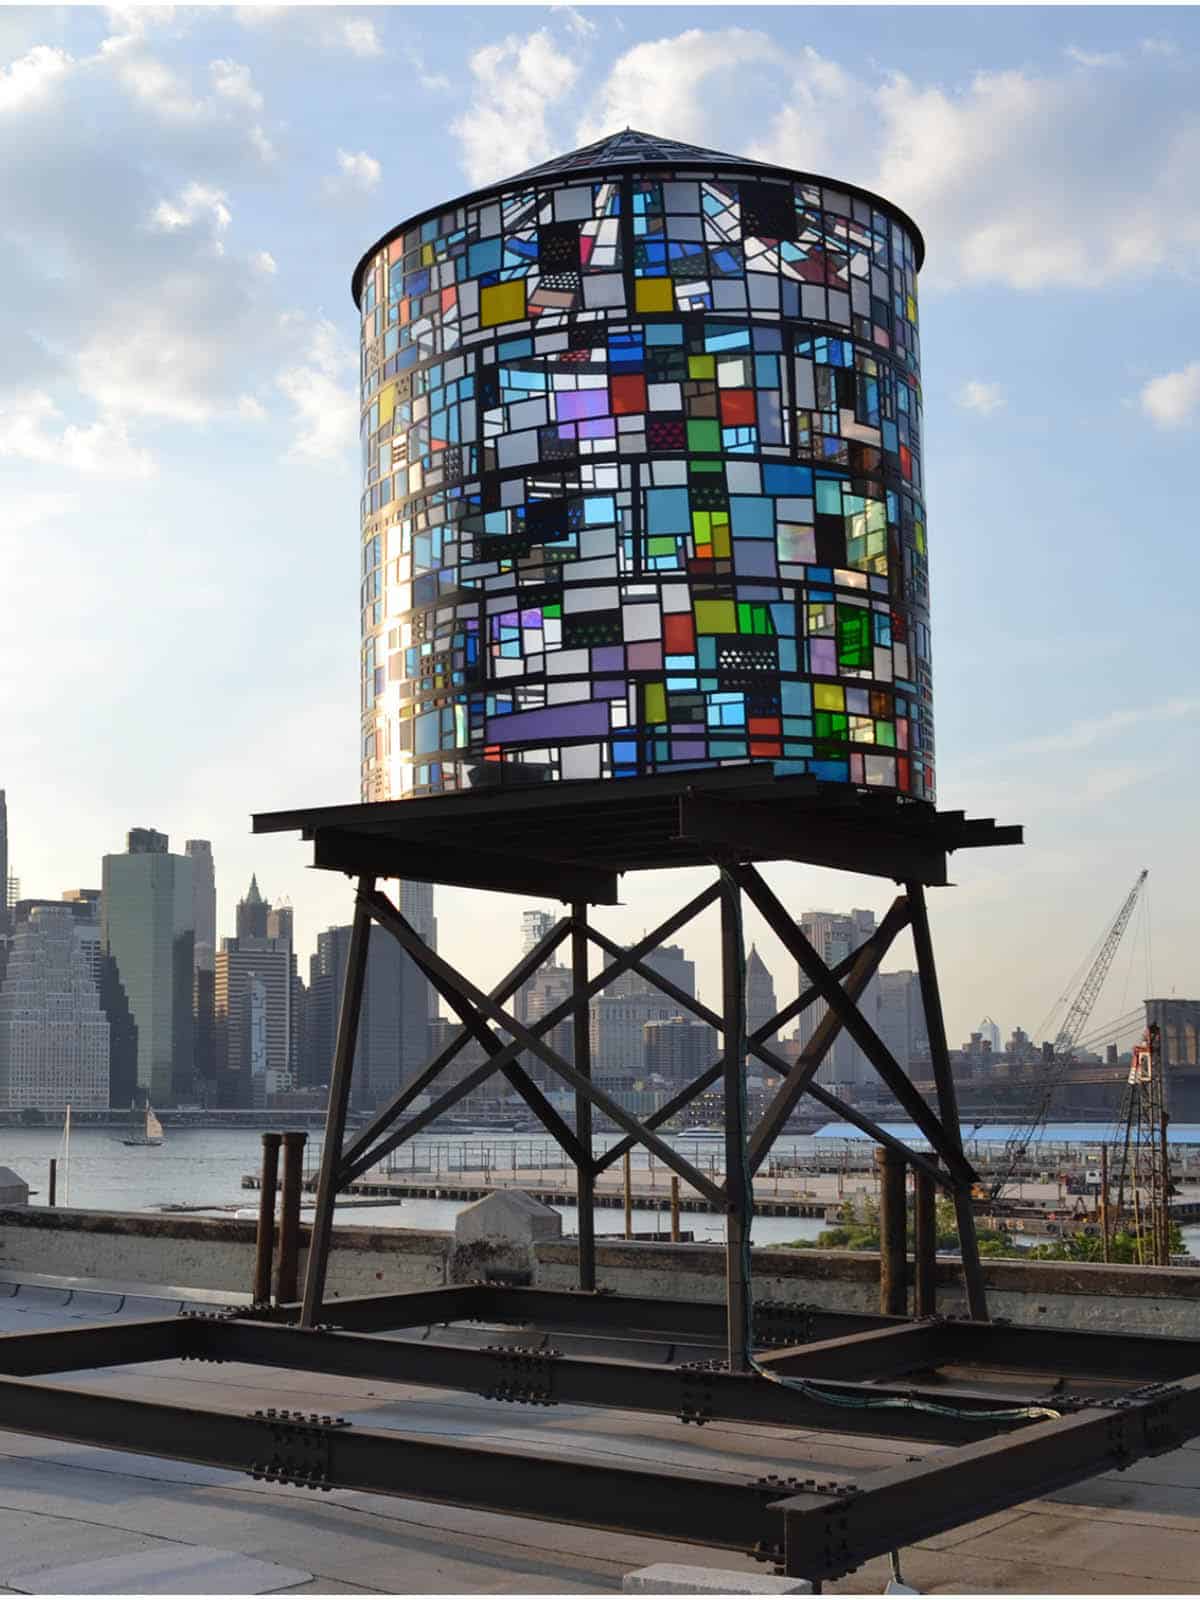 Watertower II by Tom Fruin, a colored plexiglas water tower seen on a sunny day with lower Manhattan in the background.